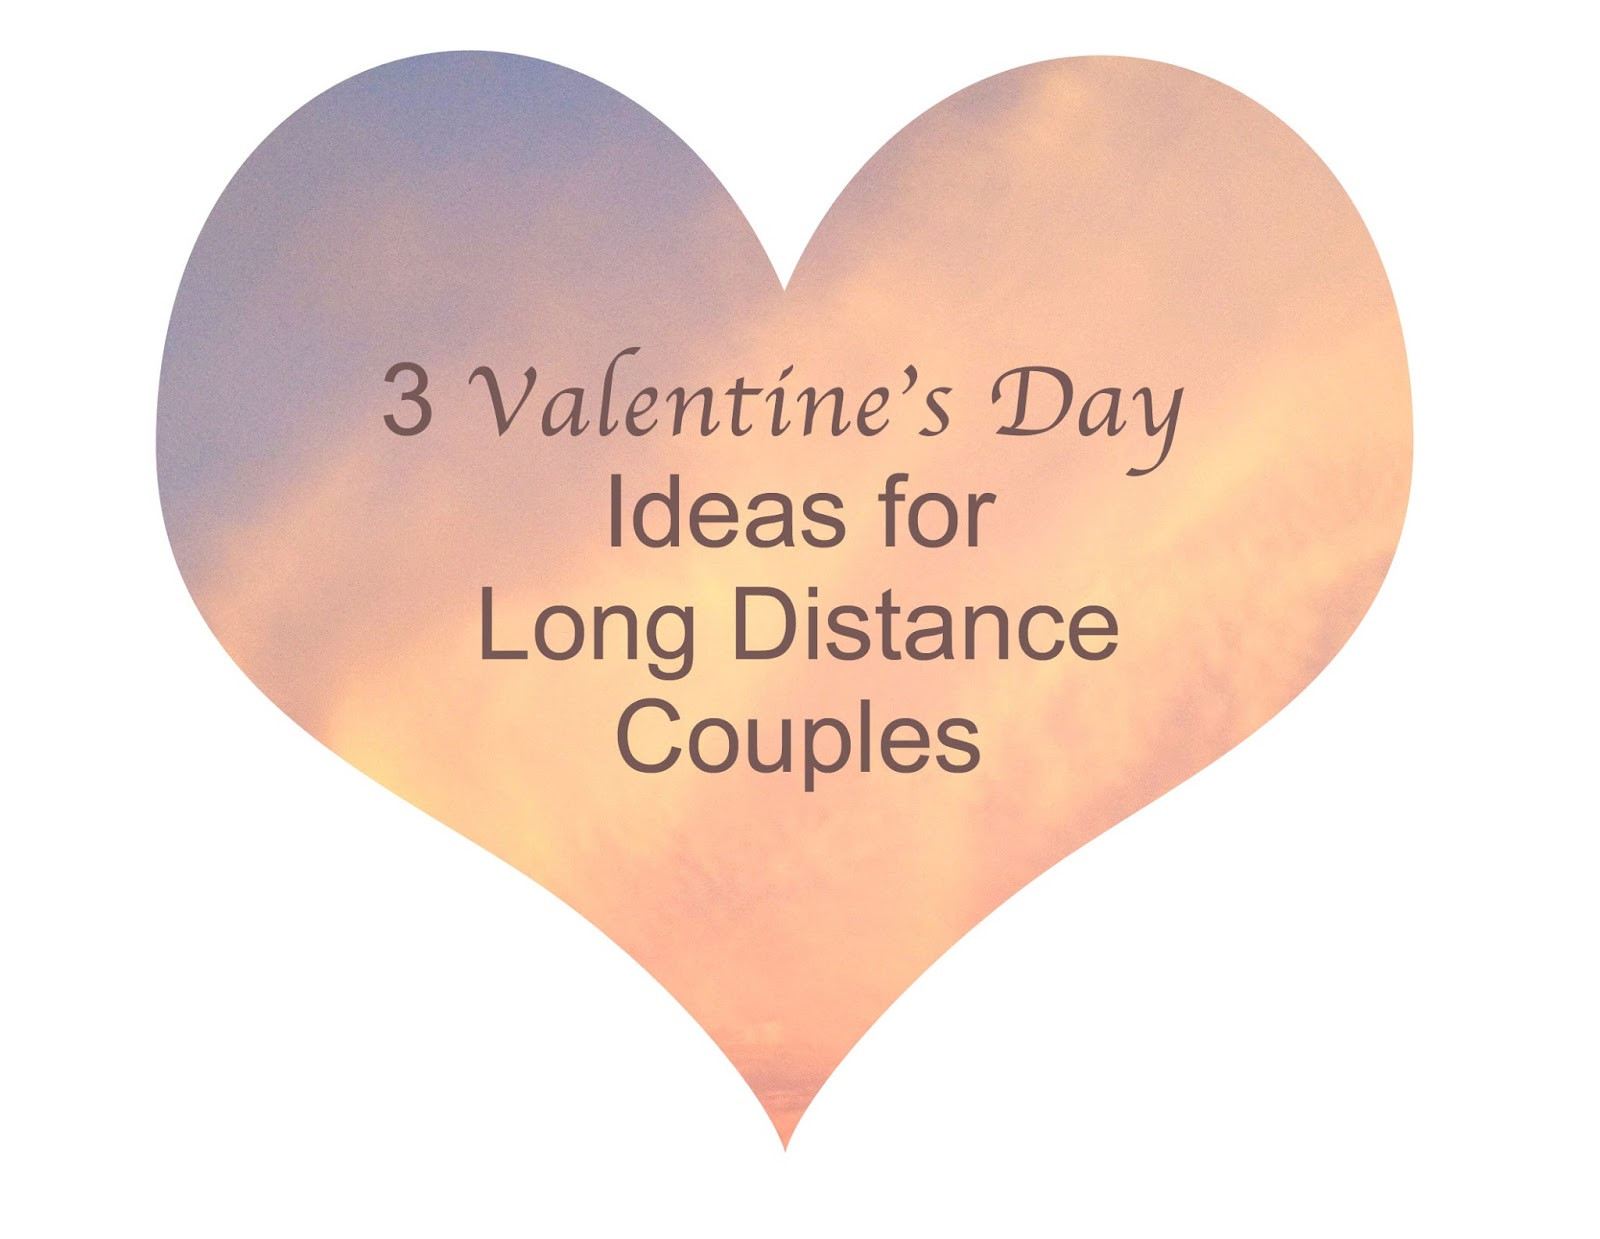 Long Distance Valentines Day Ideas For Him
 Meet Me In Midtown 3 Valentine s Day Ideas for Long